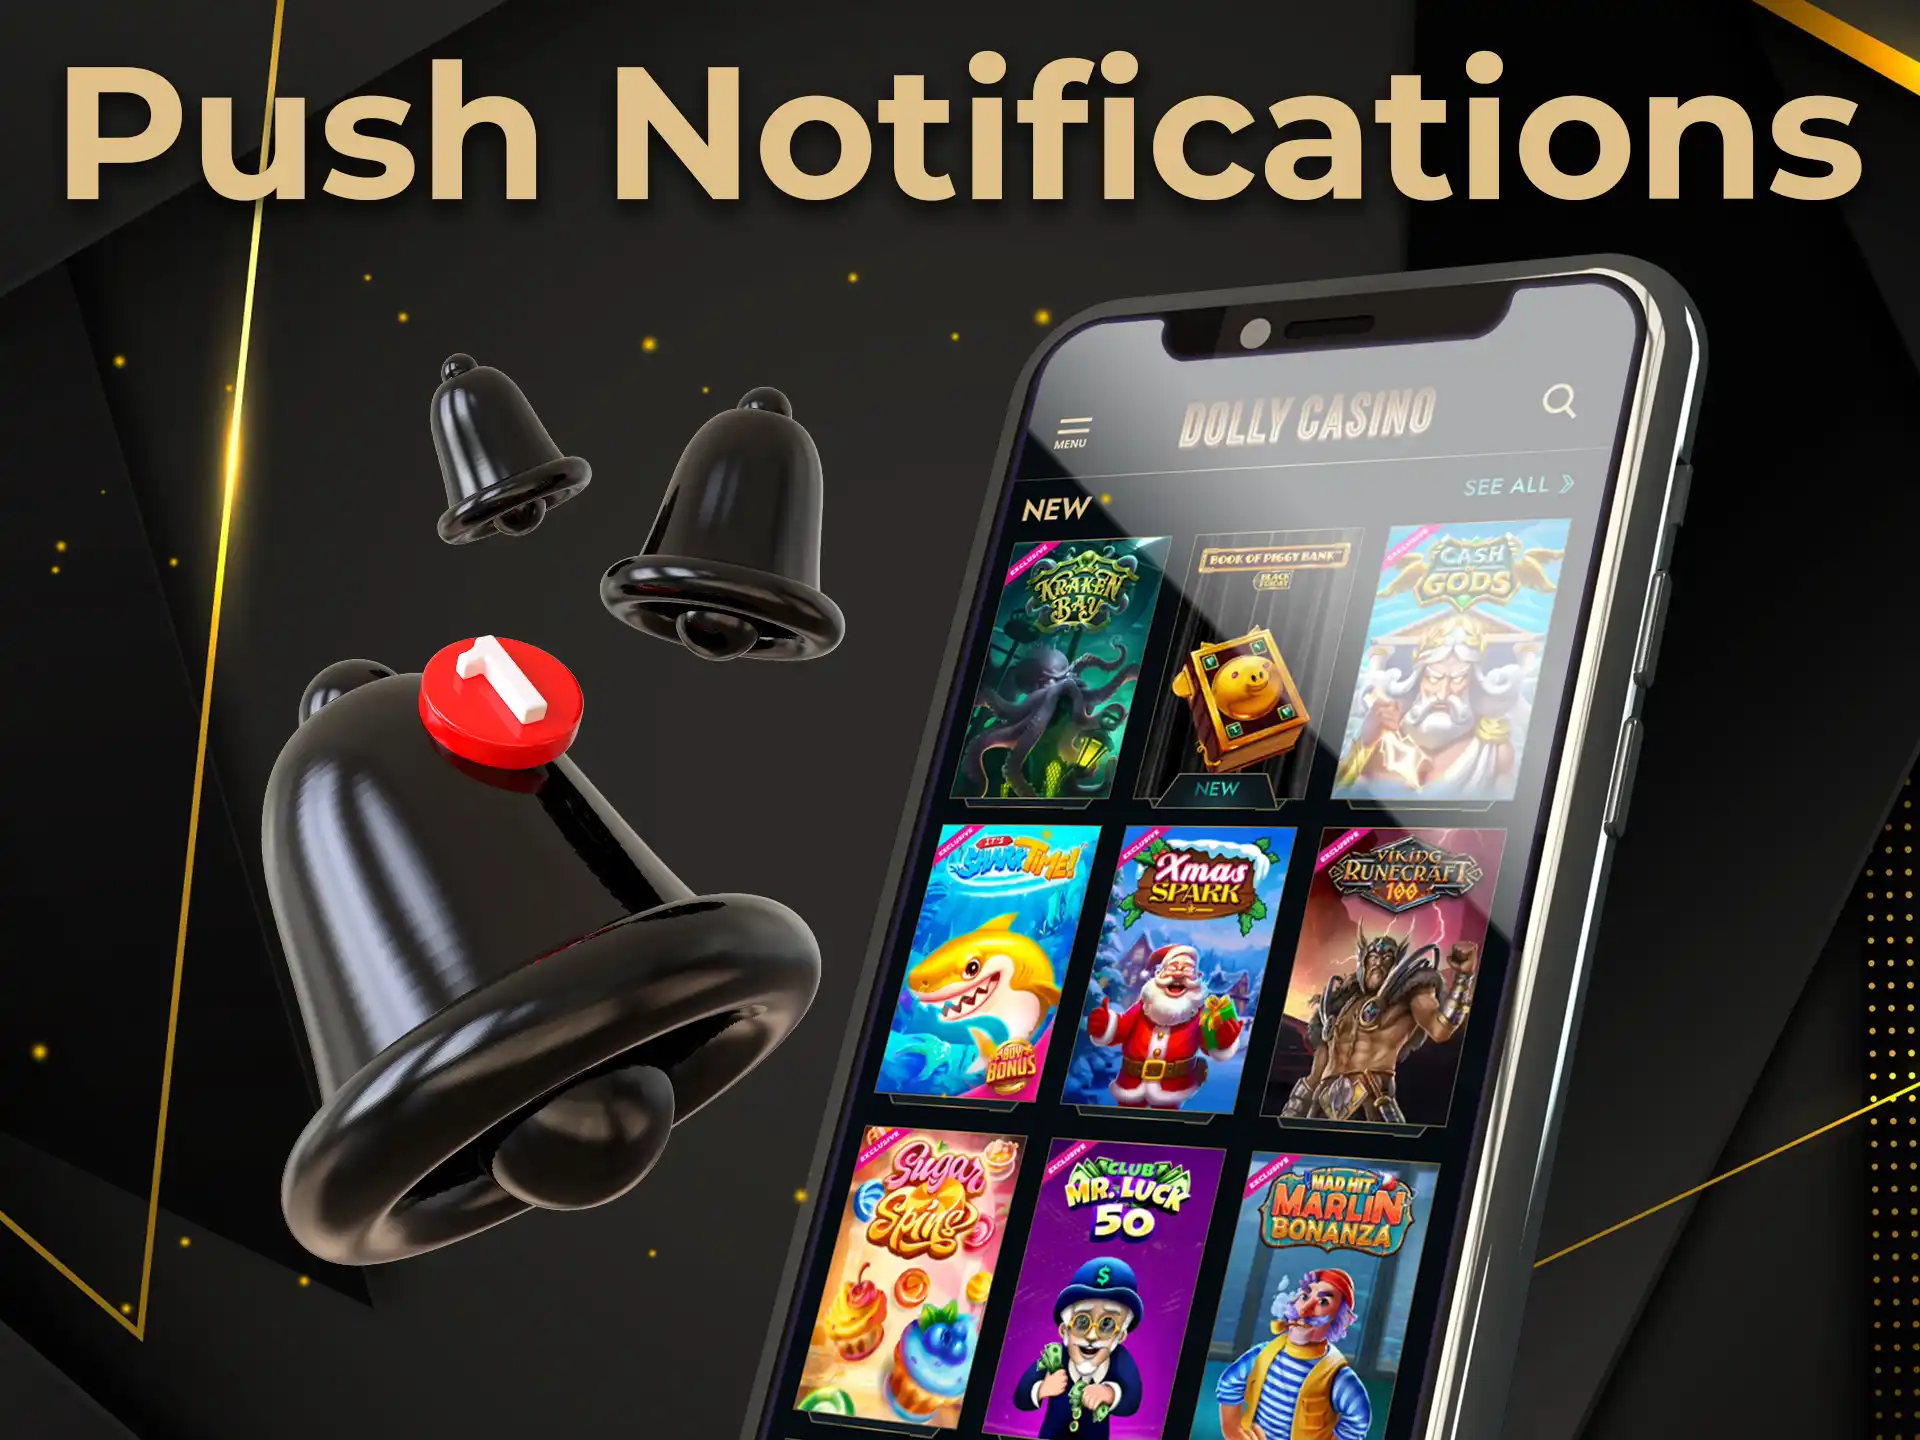 Push notifications will notify players of any changes on the site.